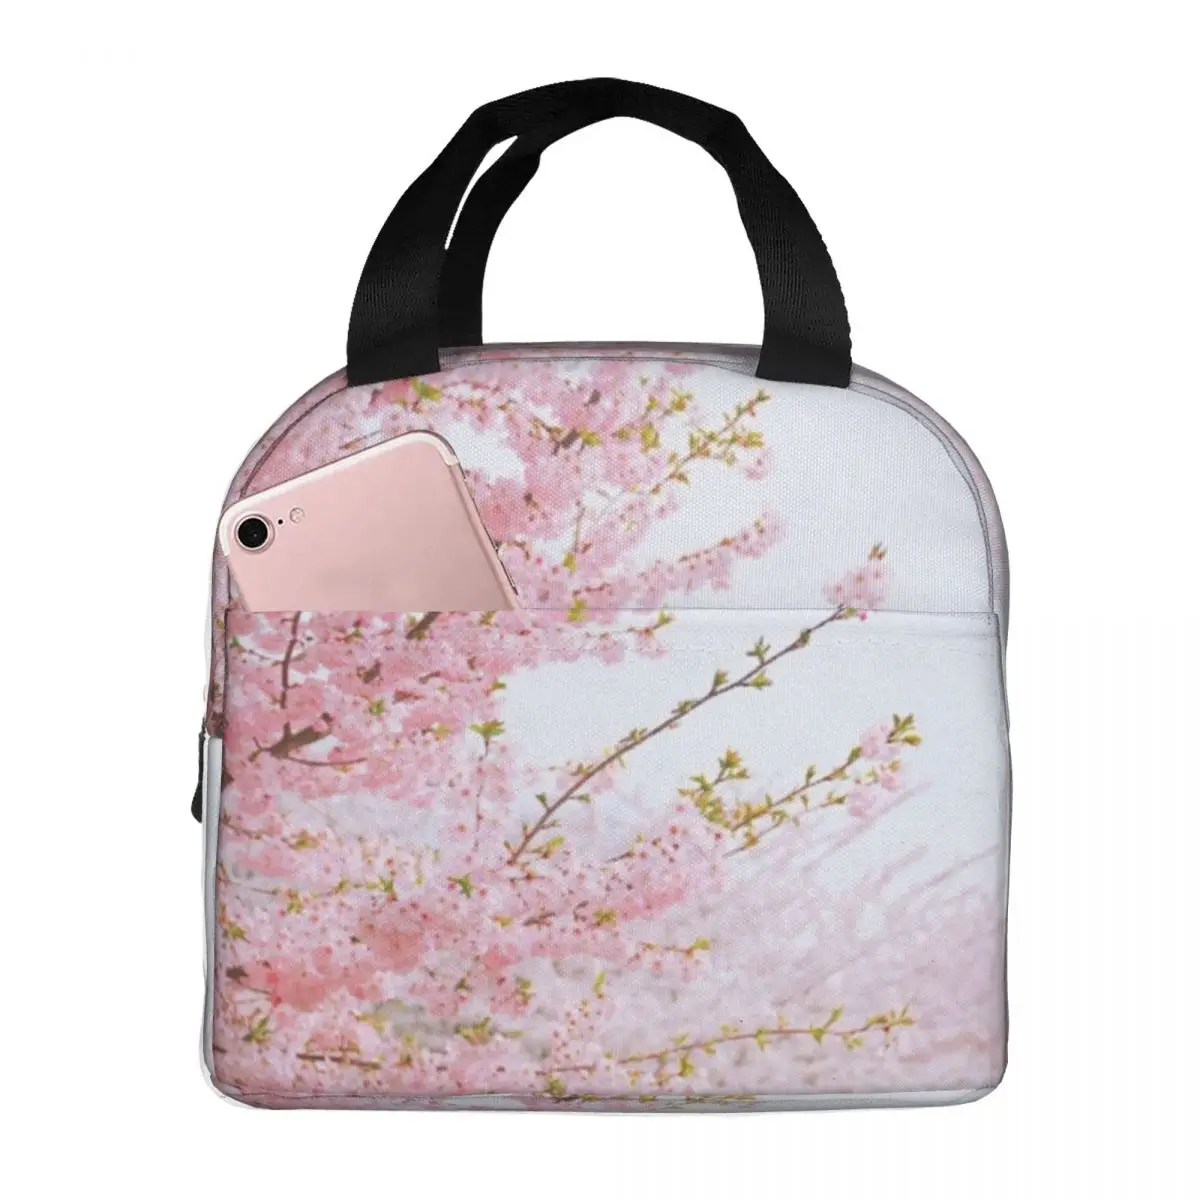 

Beautiful Park Peach Blossom Thermal Insulated Lunch Bags Meal Container Food Bag Leakproof Lunch Box Tote Picnic Teacher